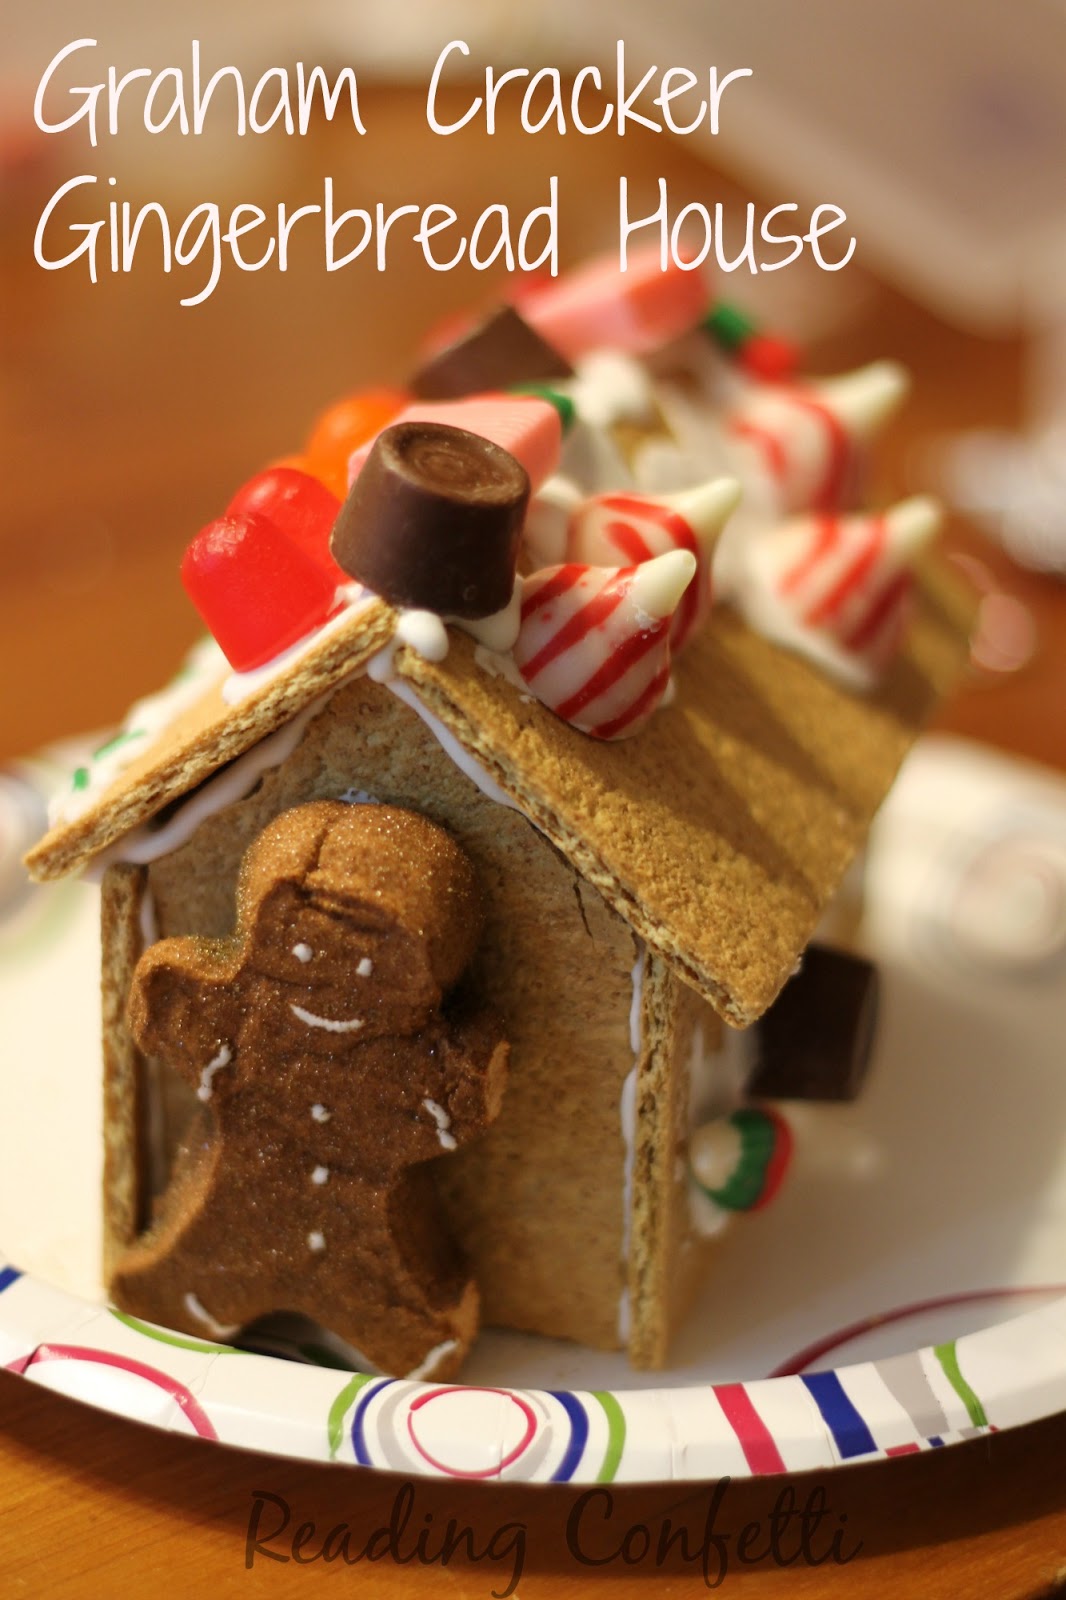 Gingerbread house made from graham crackers